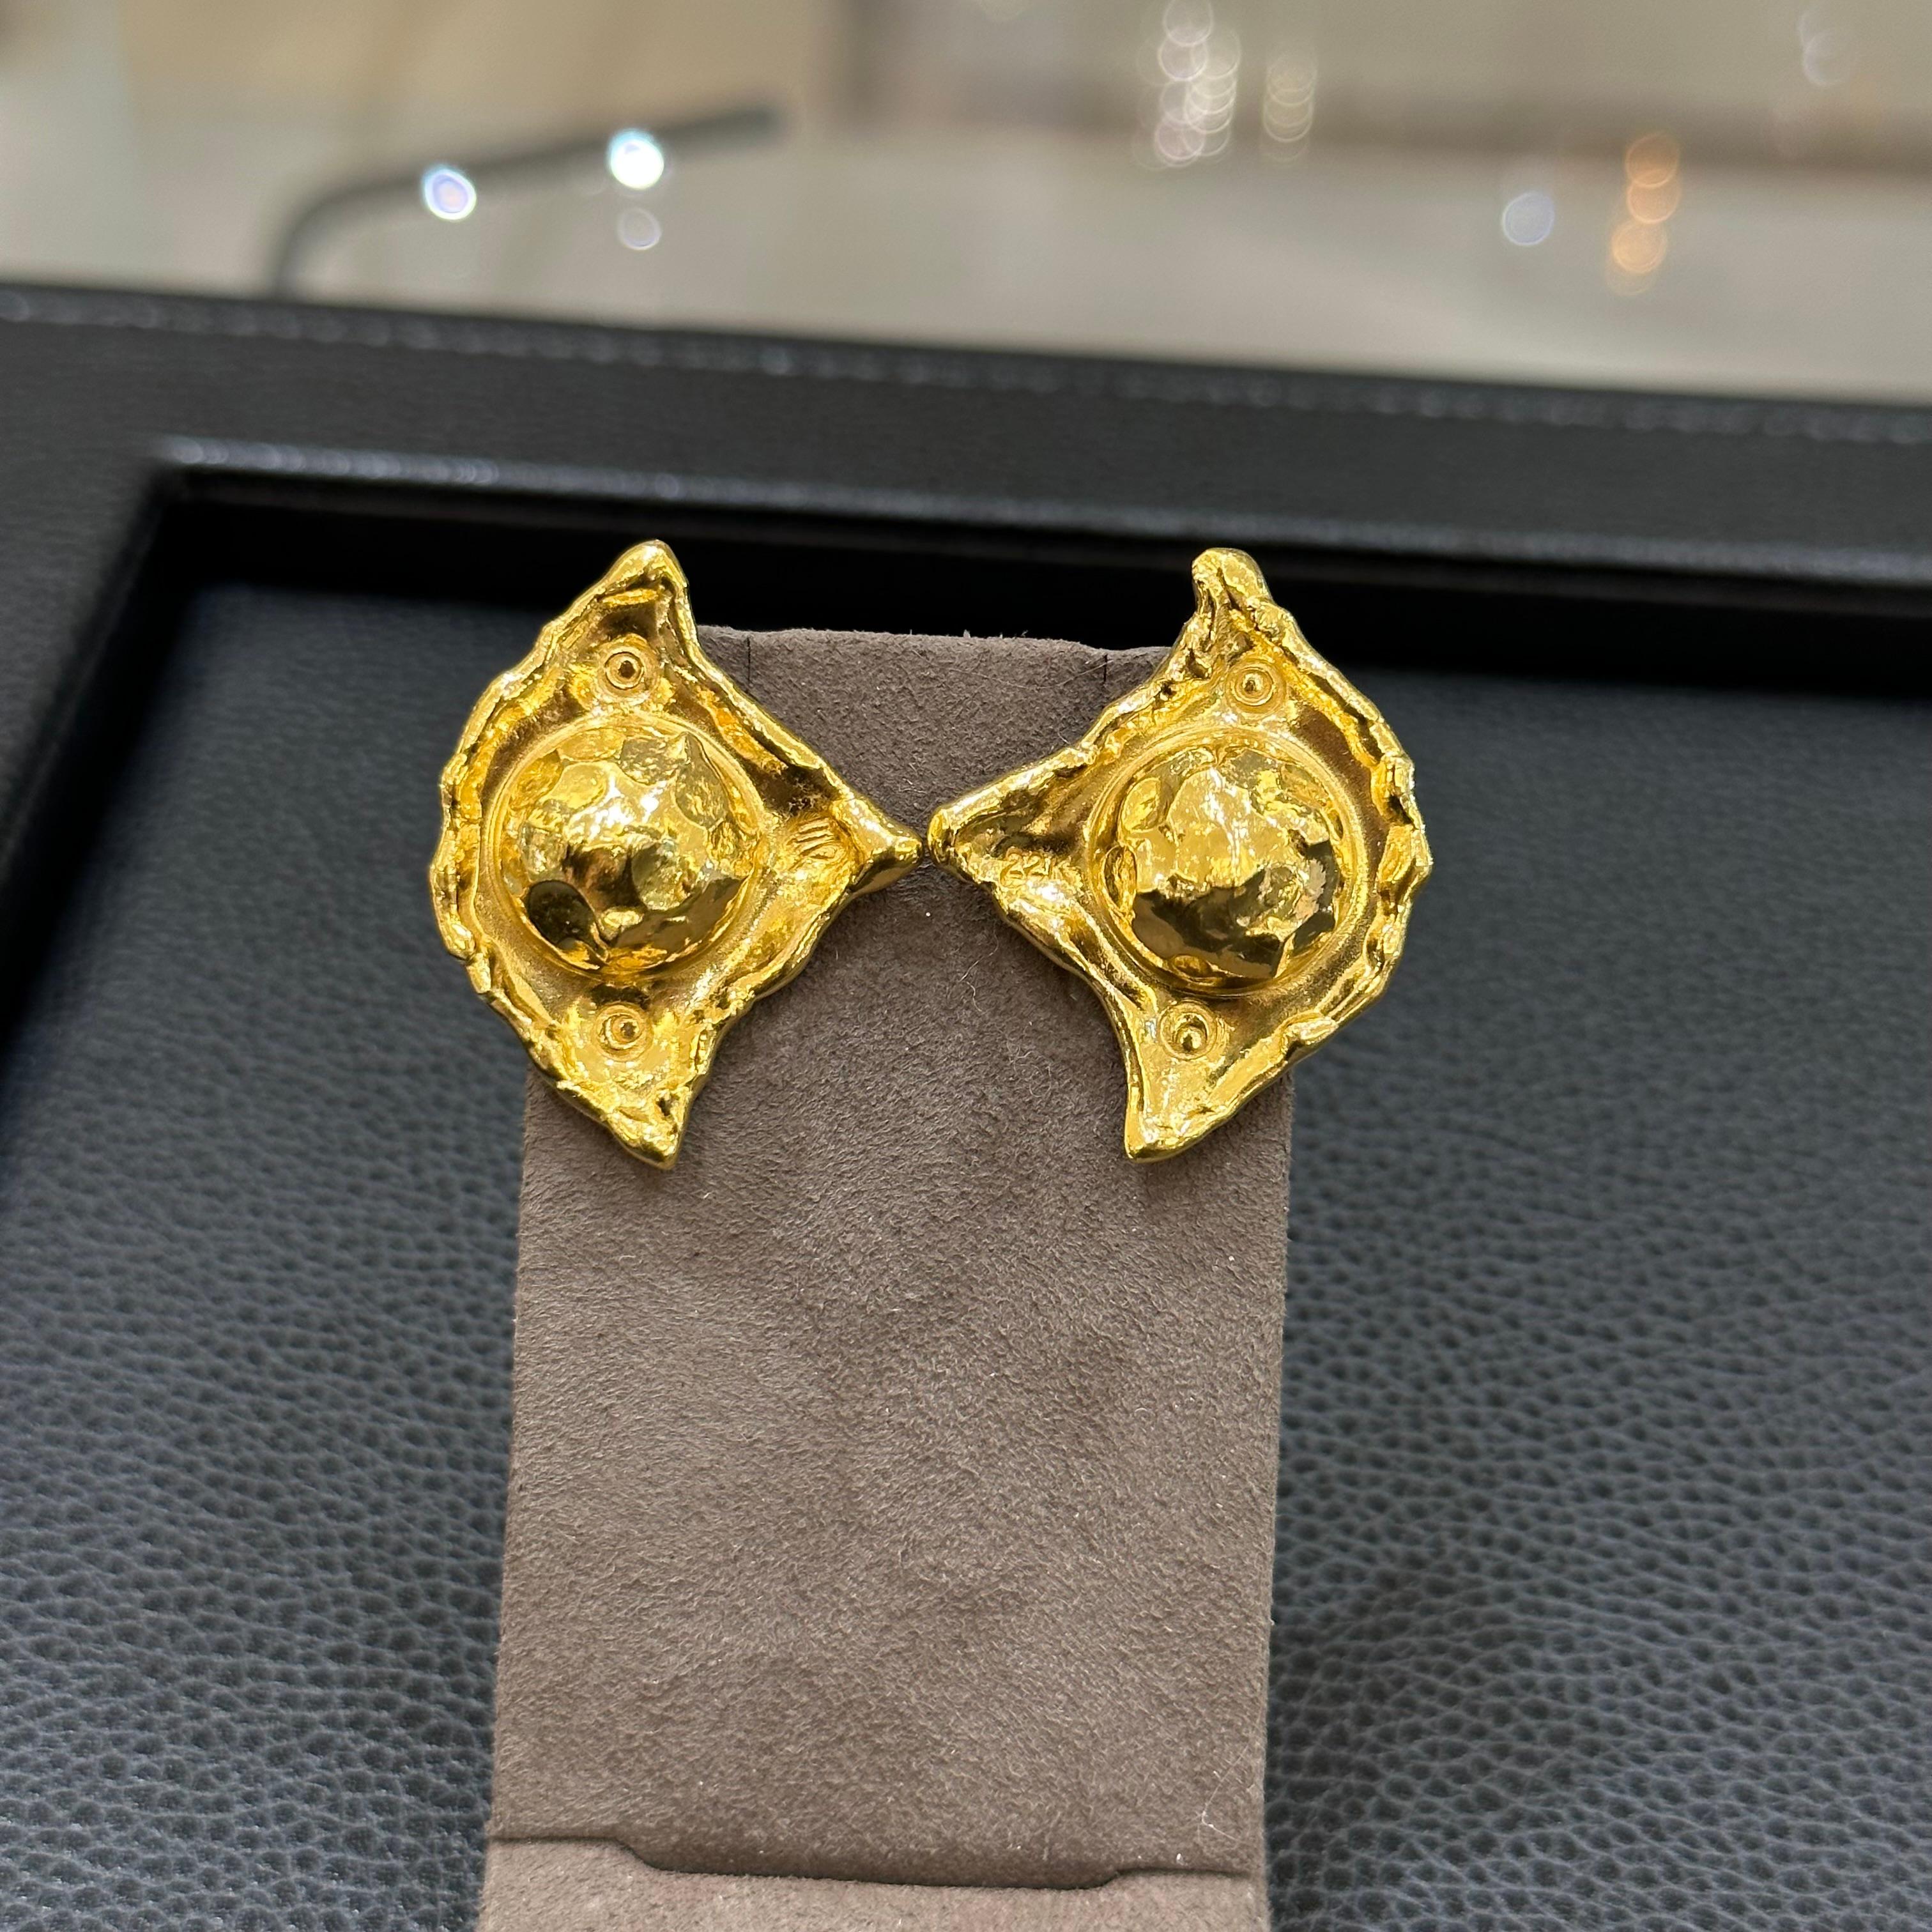 22K Jean Mahie Earrings. Square with Indented Edges and Small Dome Center. 13.50 Grams of 22K Gold.
